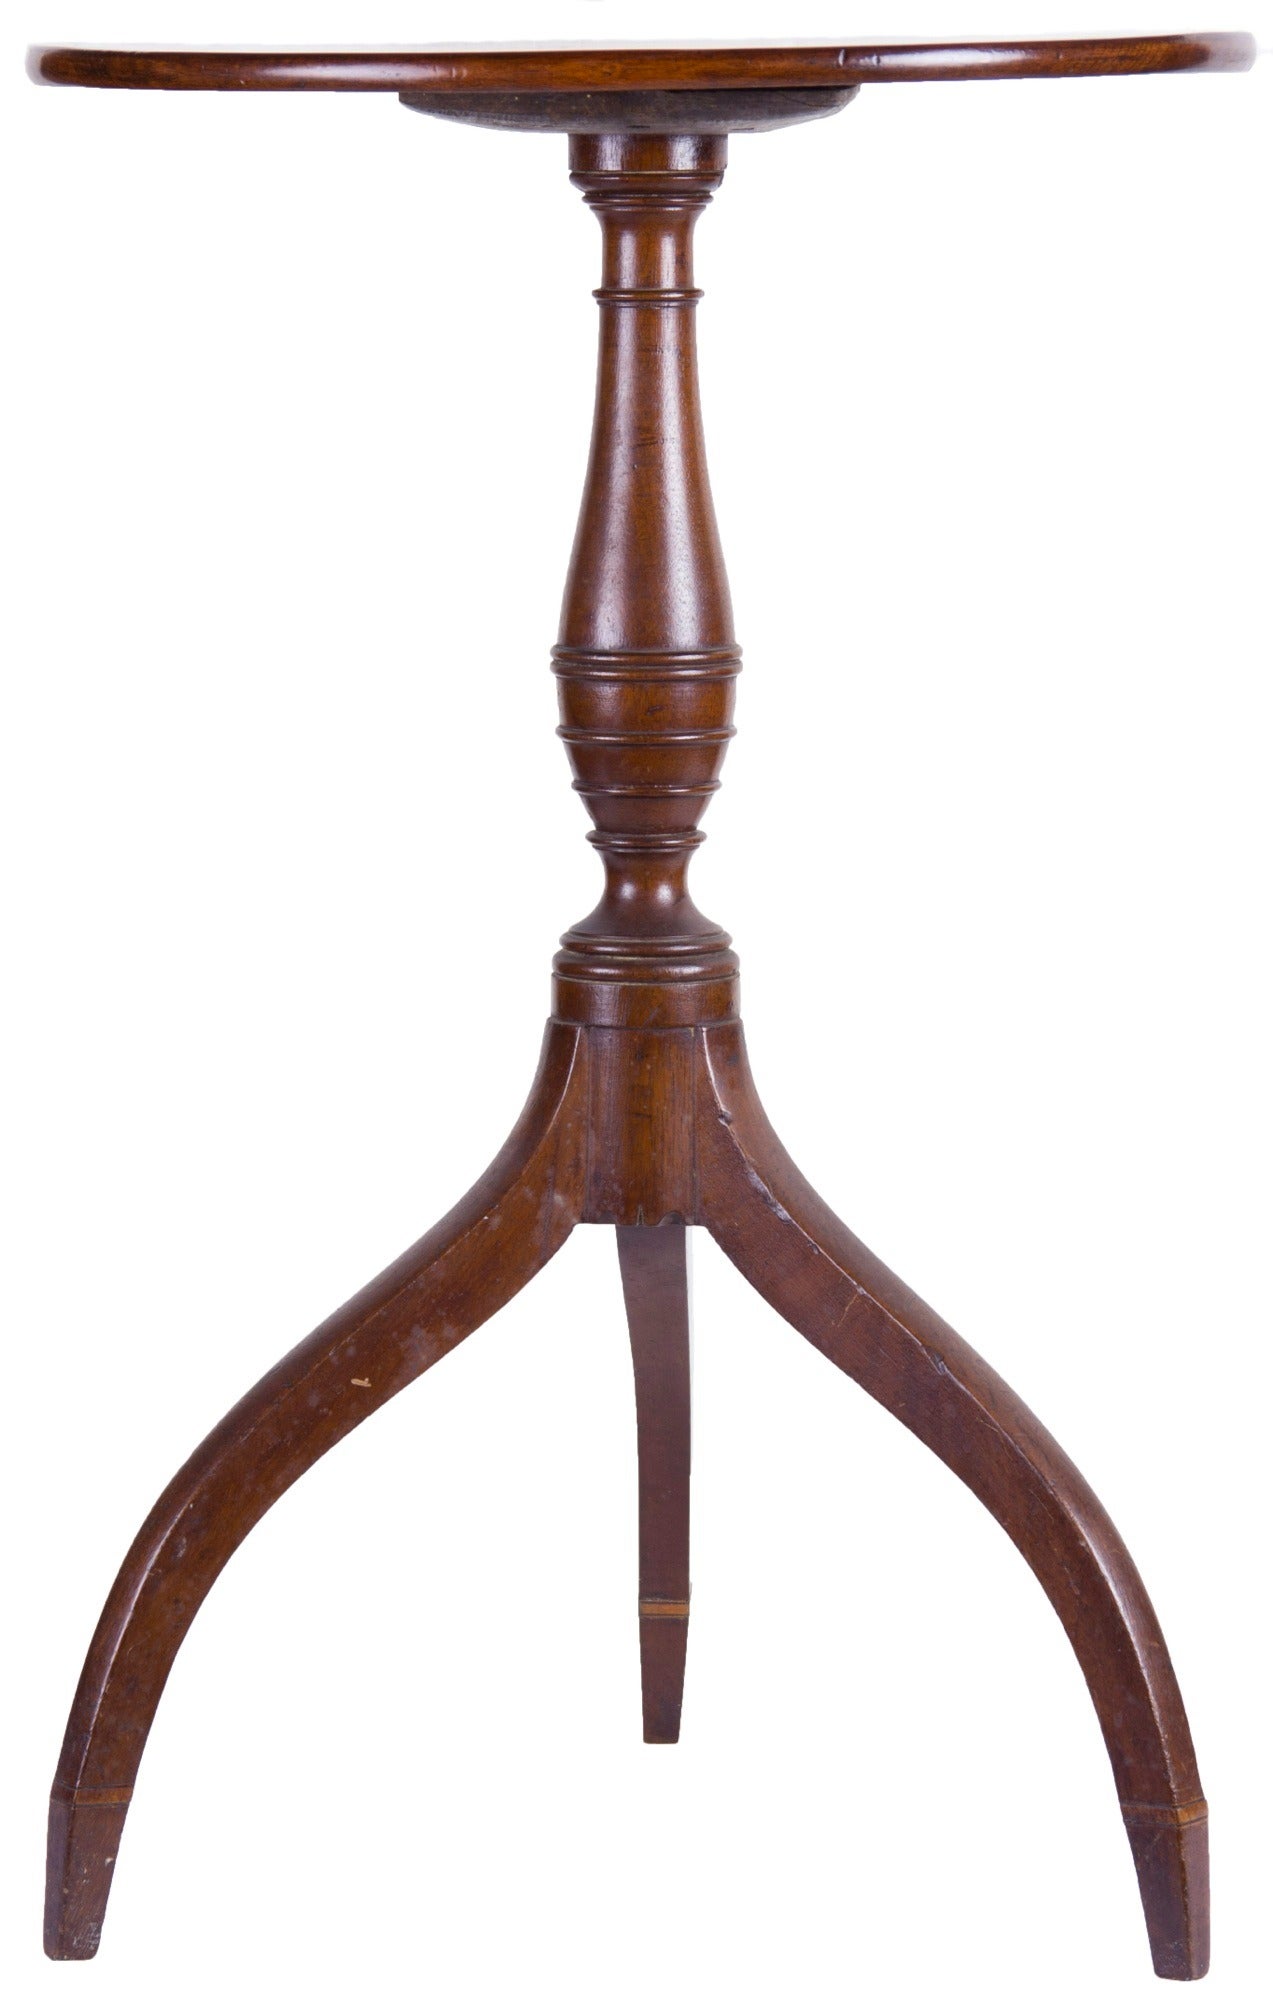 This is a lovely candlestand with great style. Note the very high lift of the legs, almost exaggerated, but beautifully formed to receive a baluster column with horizontal reeding similar to documented Seymour pieces.

The top is of a fine